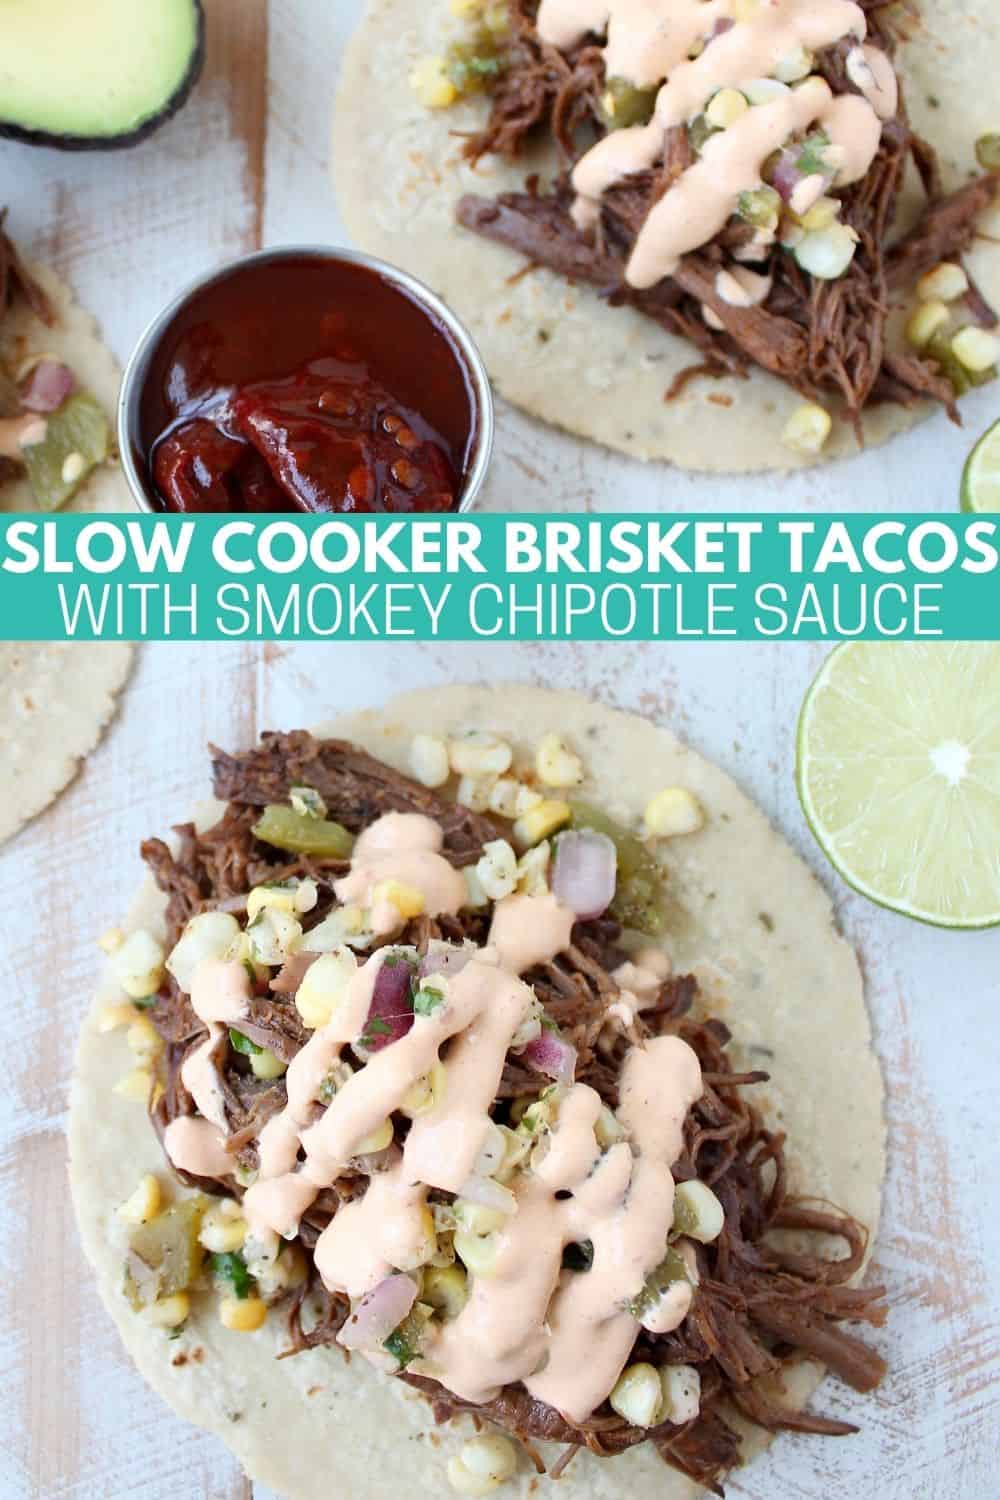 Smoked Chipotle Brisket Tacos - Slow Cooker Recipe | WhitneyBond.com